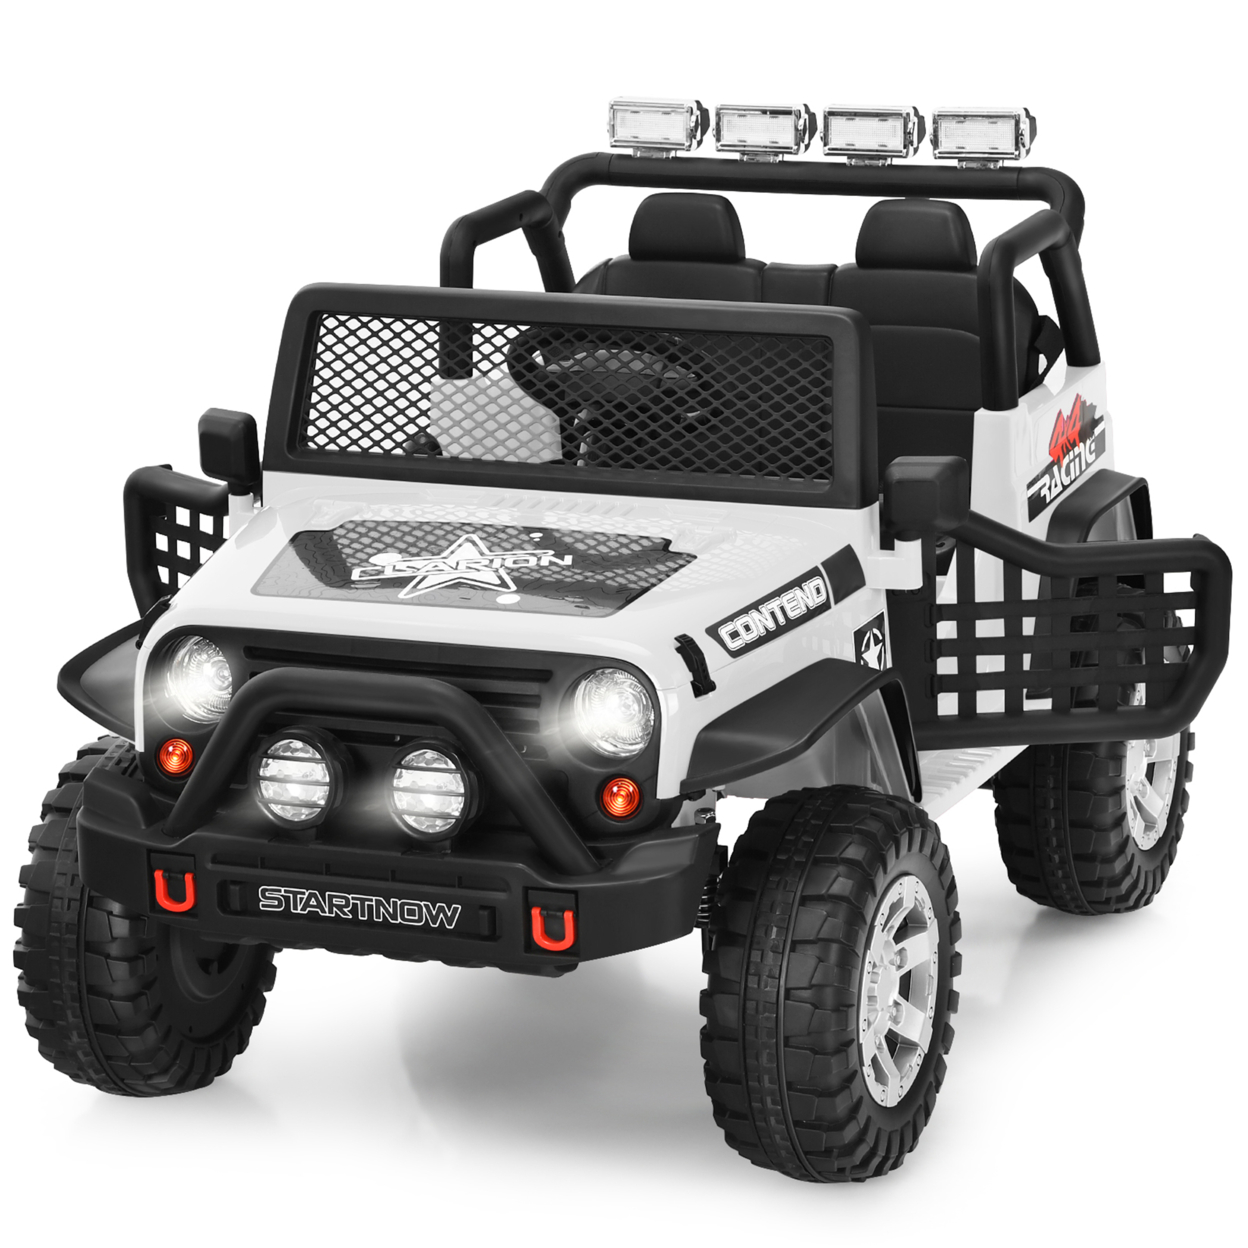 12V Electric Kids Ride On Car Truck W/ MP3 Horn 2.4G Remote Control - White